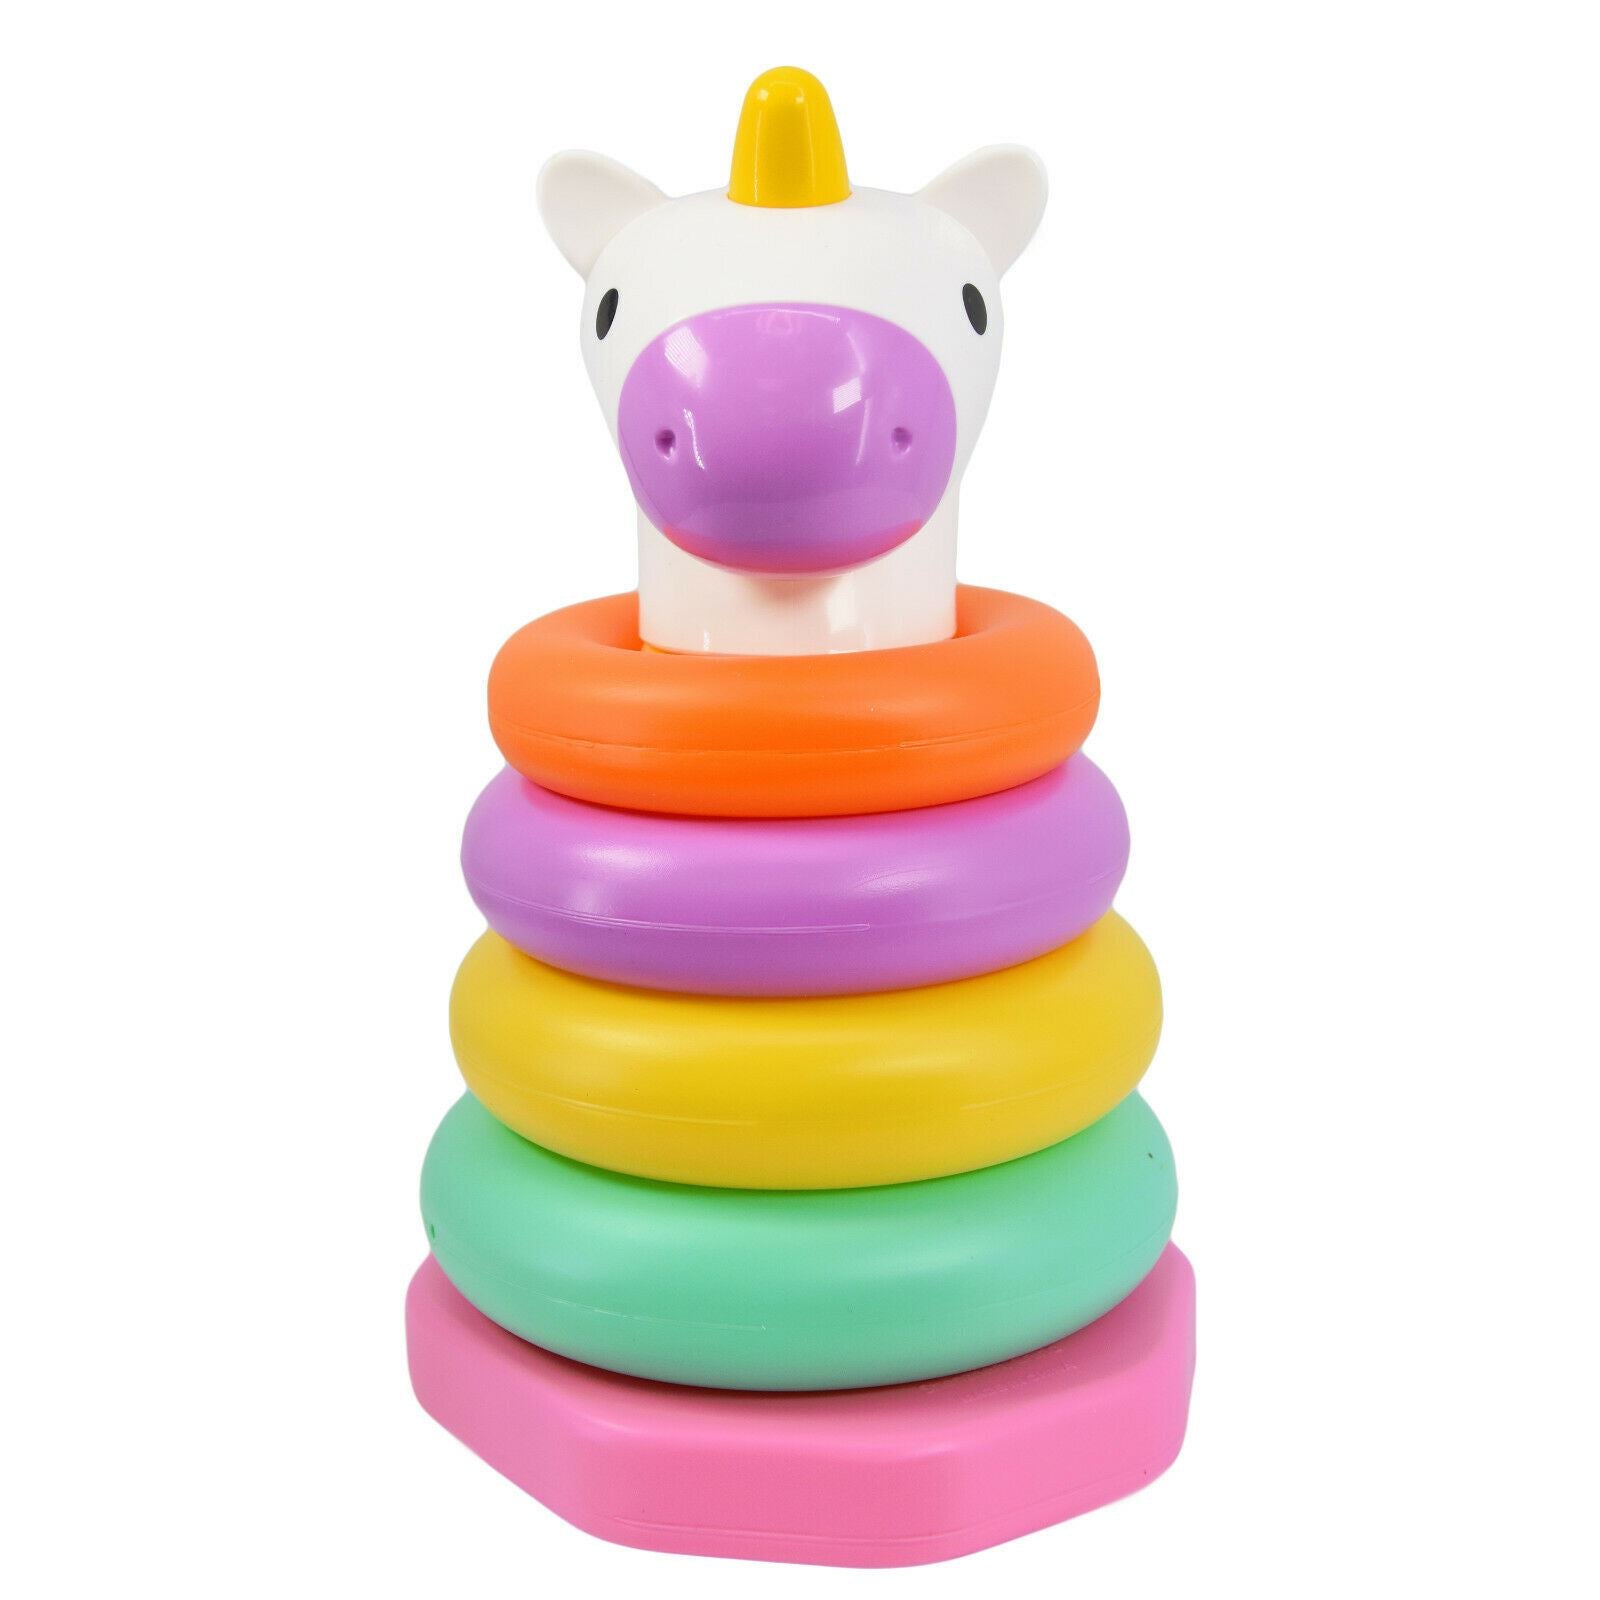 The Magic Toy Shop Stacking Rings "Una The Unicorn" Baby Stacking Rings